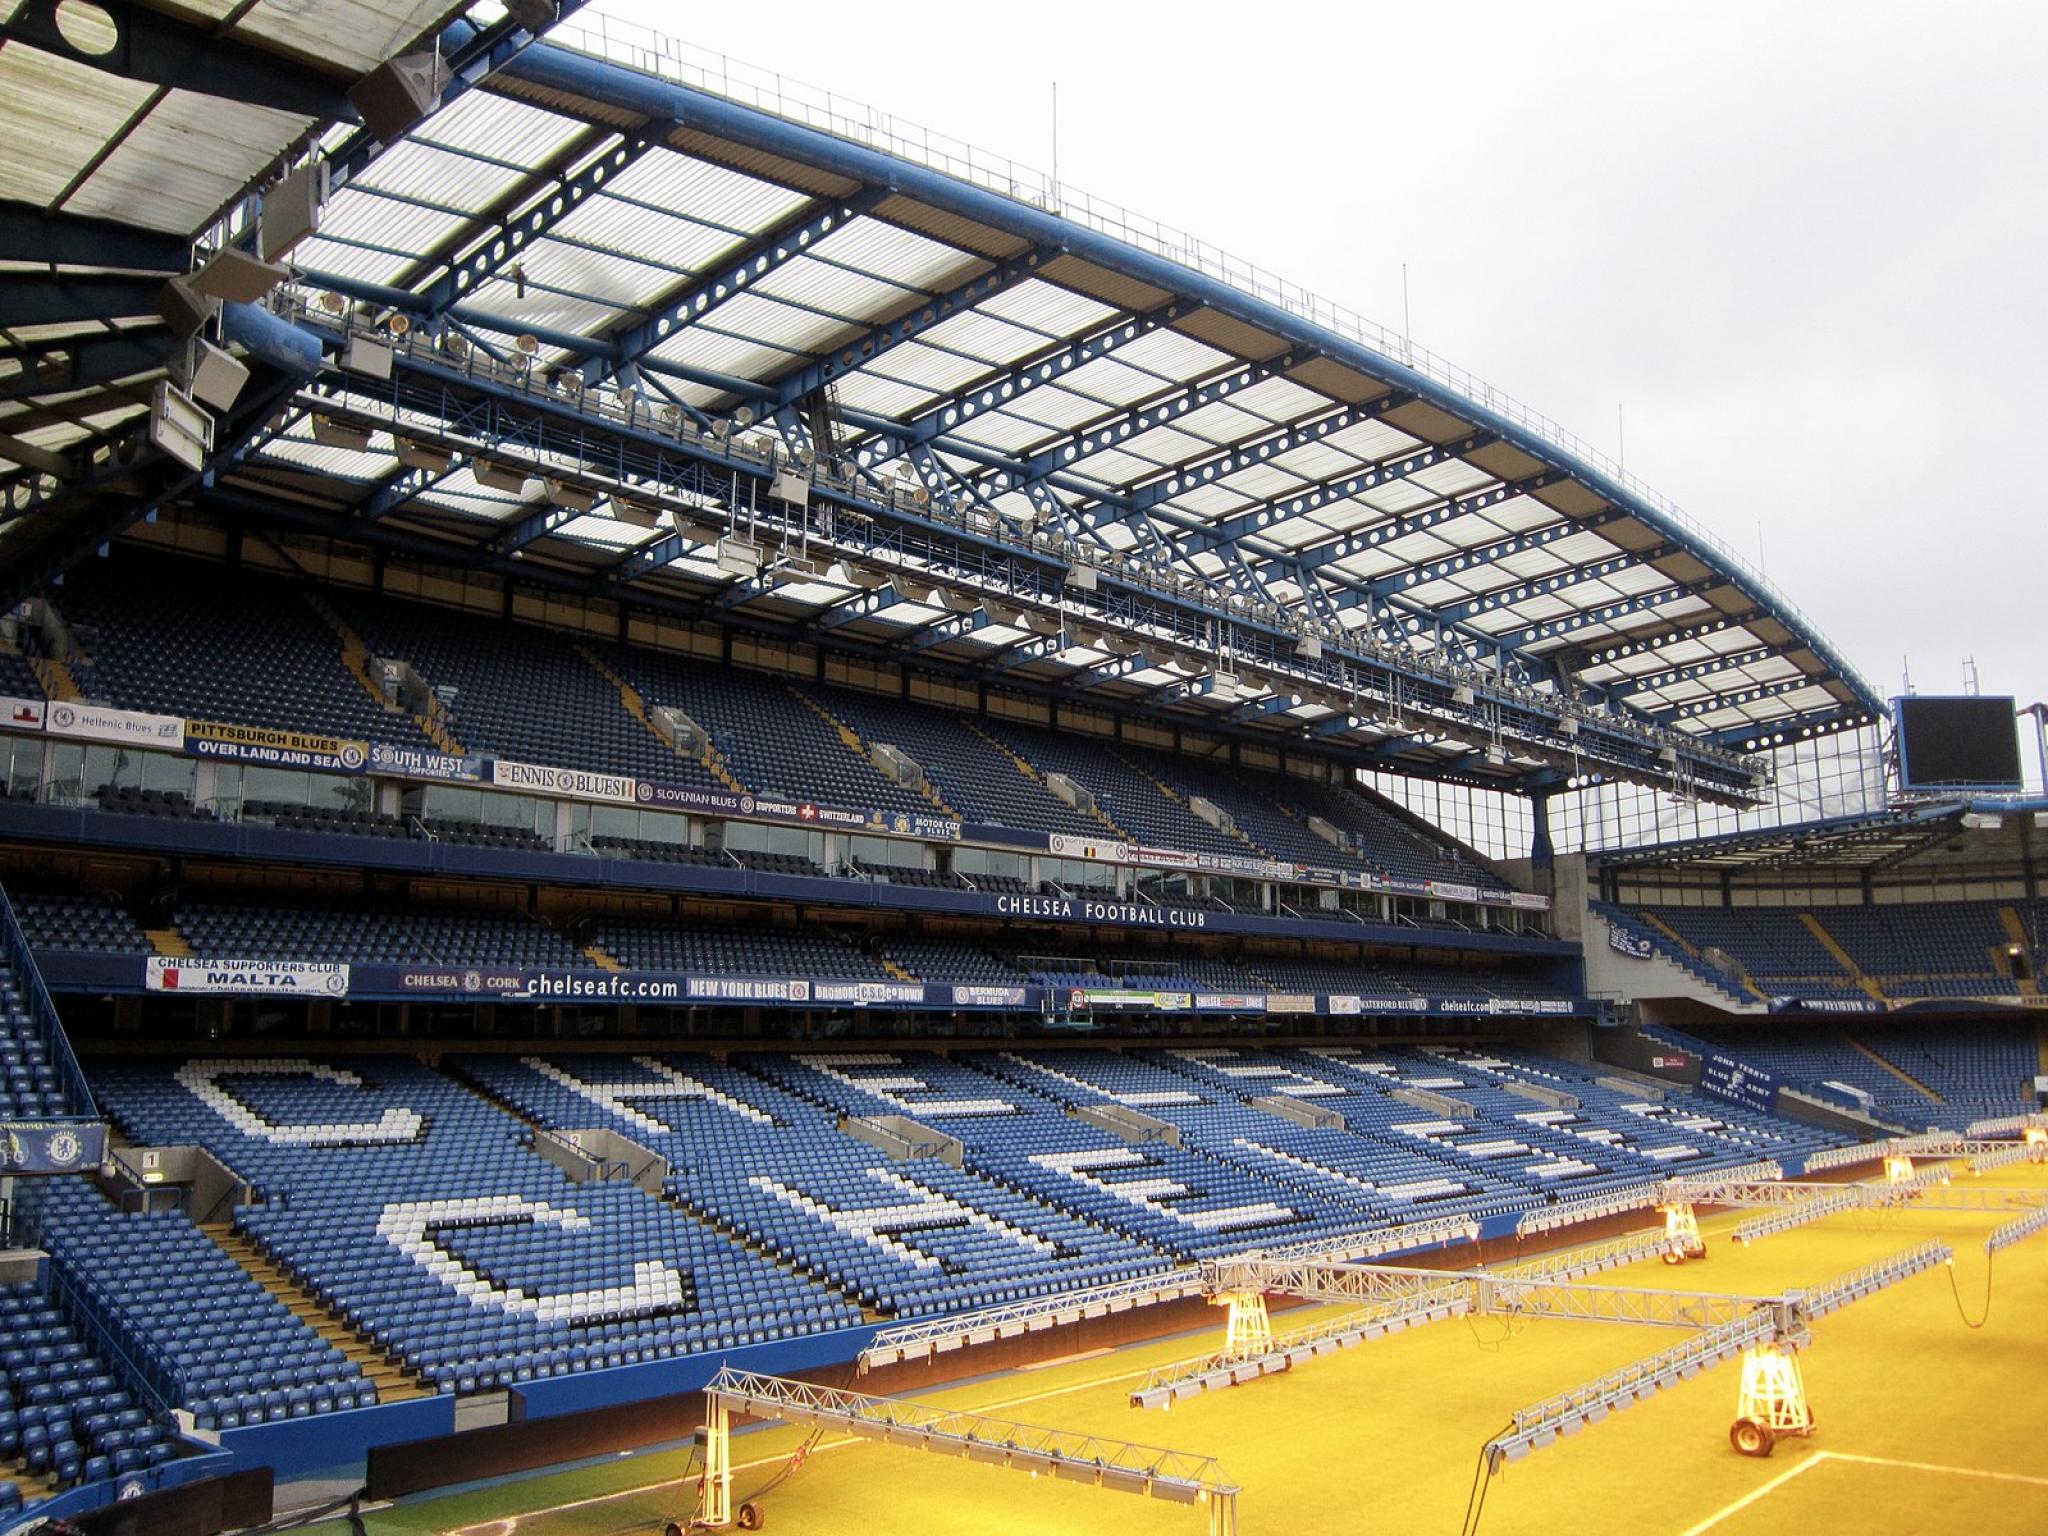  russian-billionaire-roman-abramovich-to-sell-chelsea-fc-what-it-means-who-could-buy-it-and-3-stocks-to-watch 